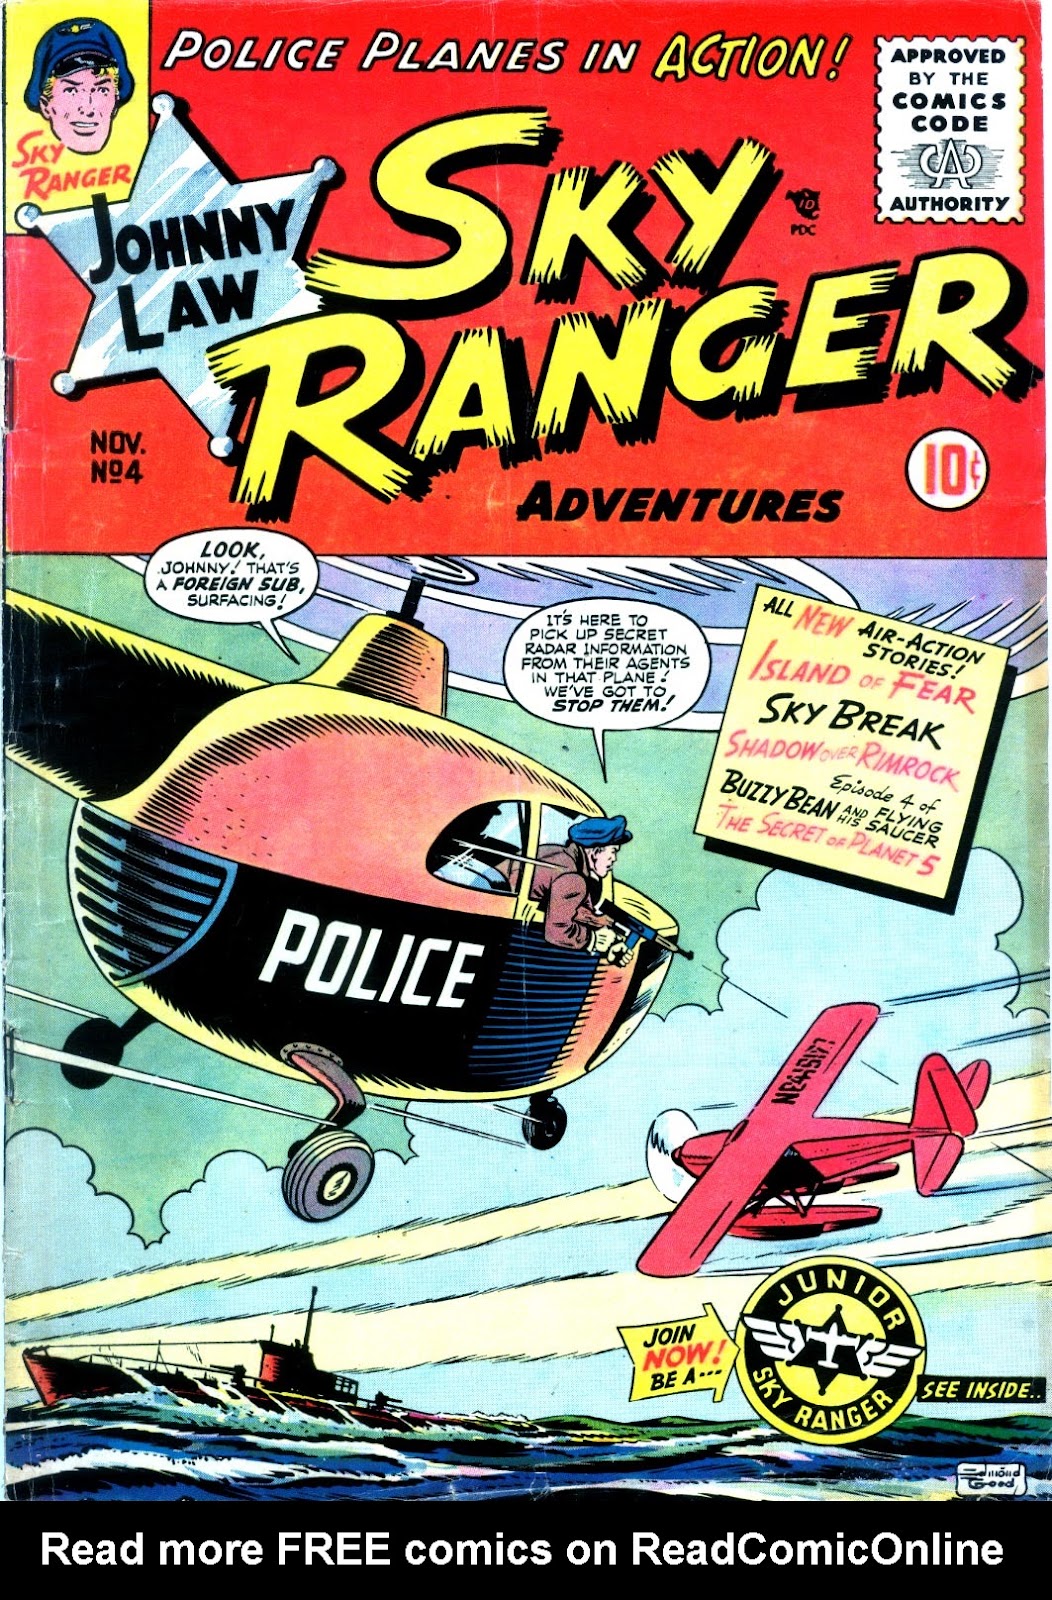 Johnny Law Sky Ranger Adventures issue 4 - Page 1